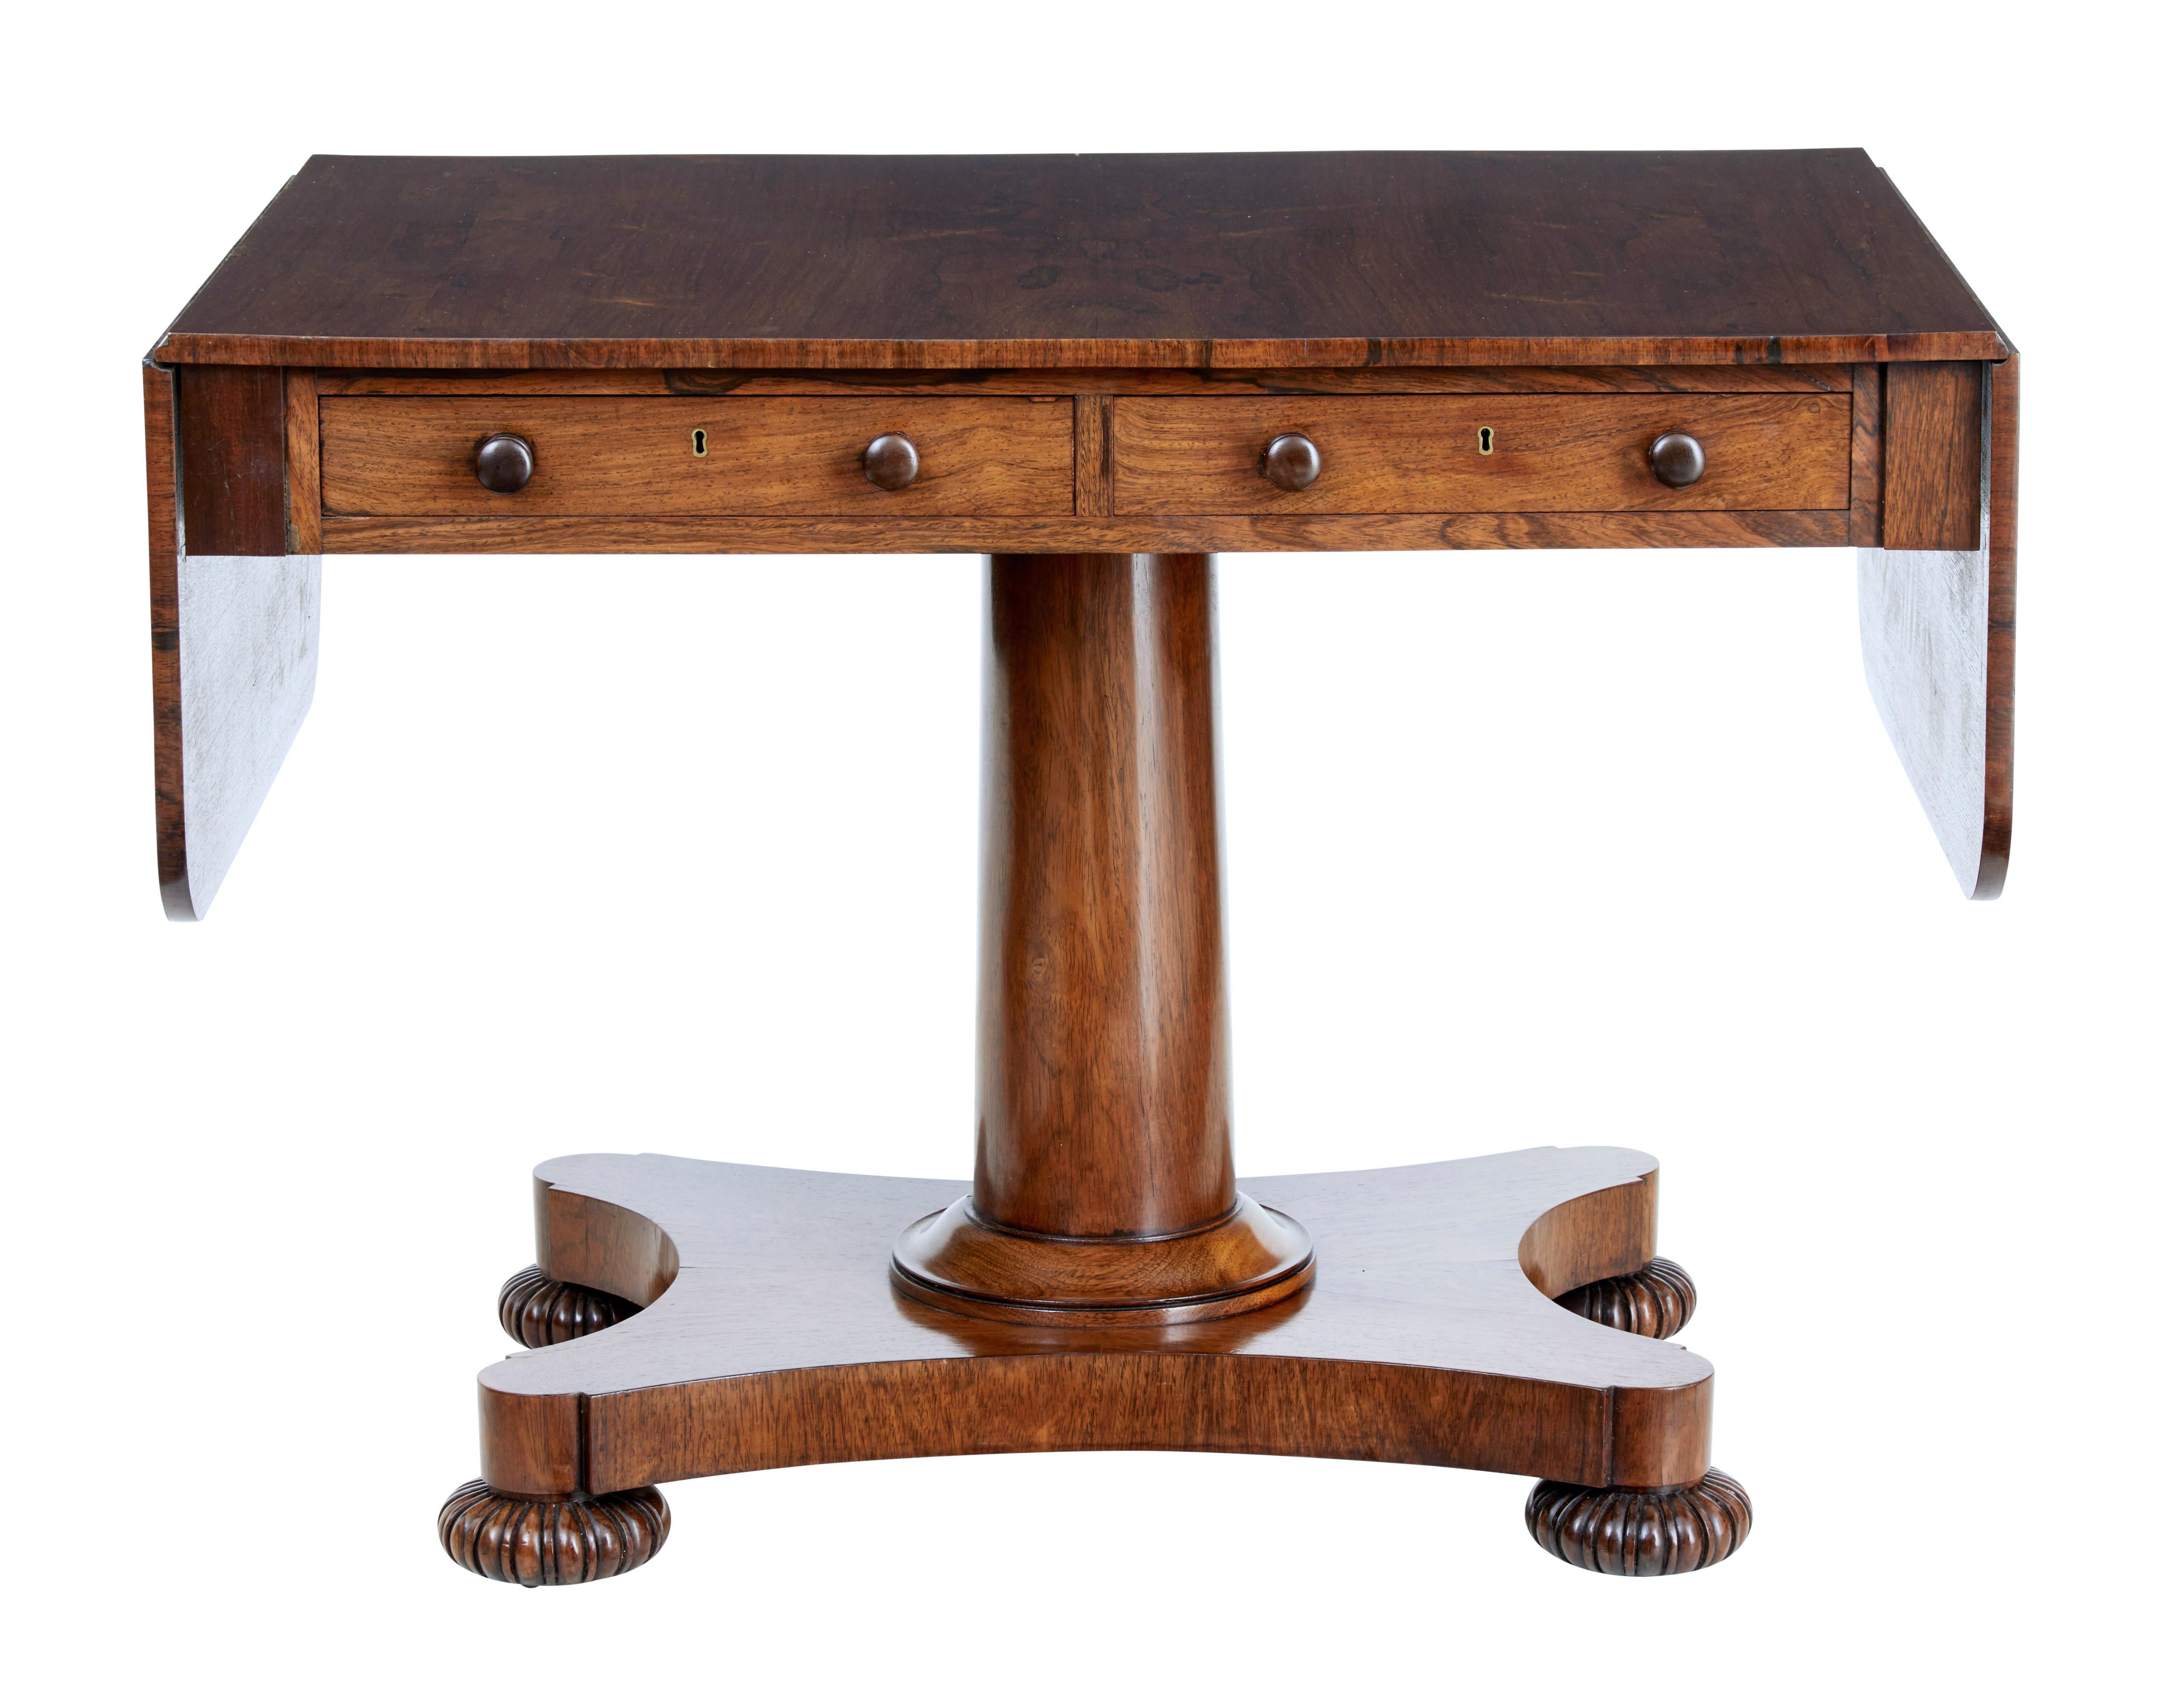 Fine quality regency period sofa table, circa 1820.

We are pleased to showcase this sofa table of ideal proportions.

Stunning rosewood veneers. 2 drawers to the front.

Standing on stem and quadriform base, shaped bun feet and original